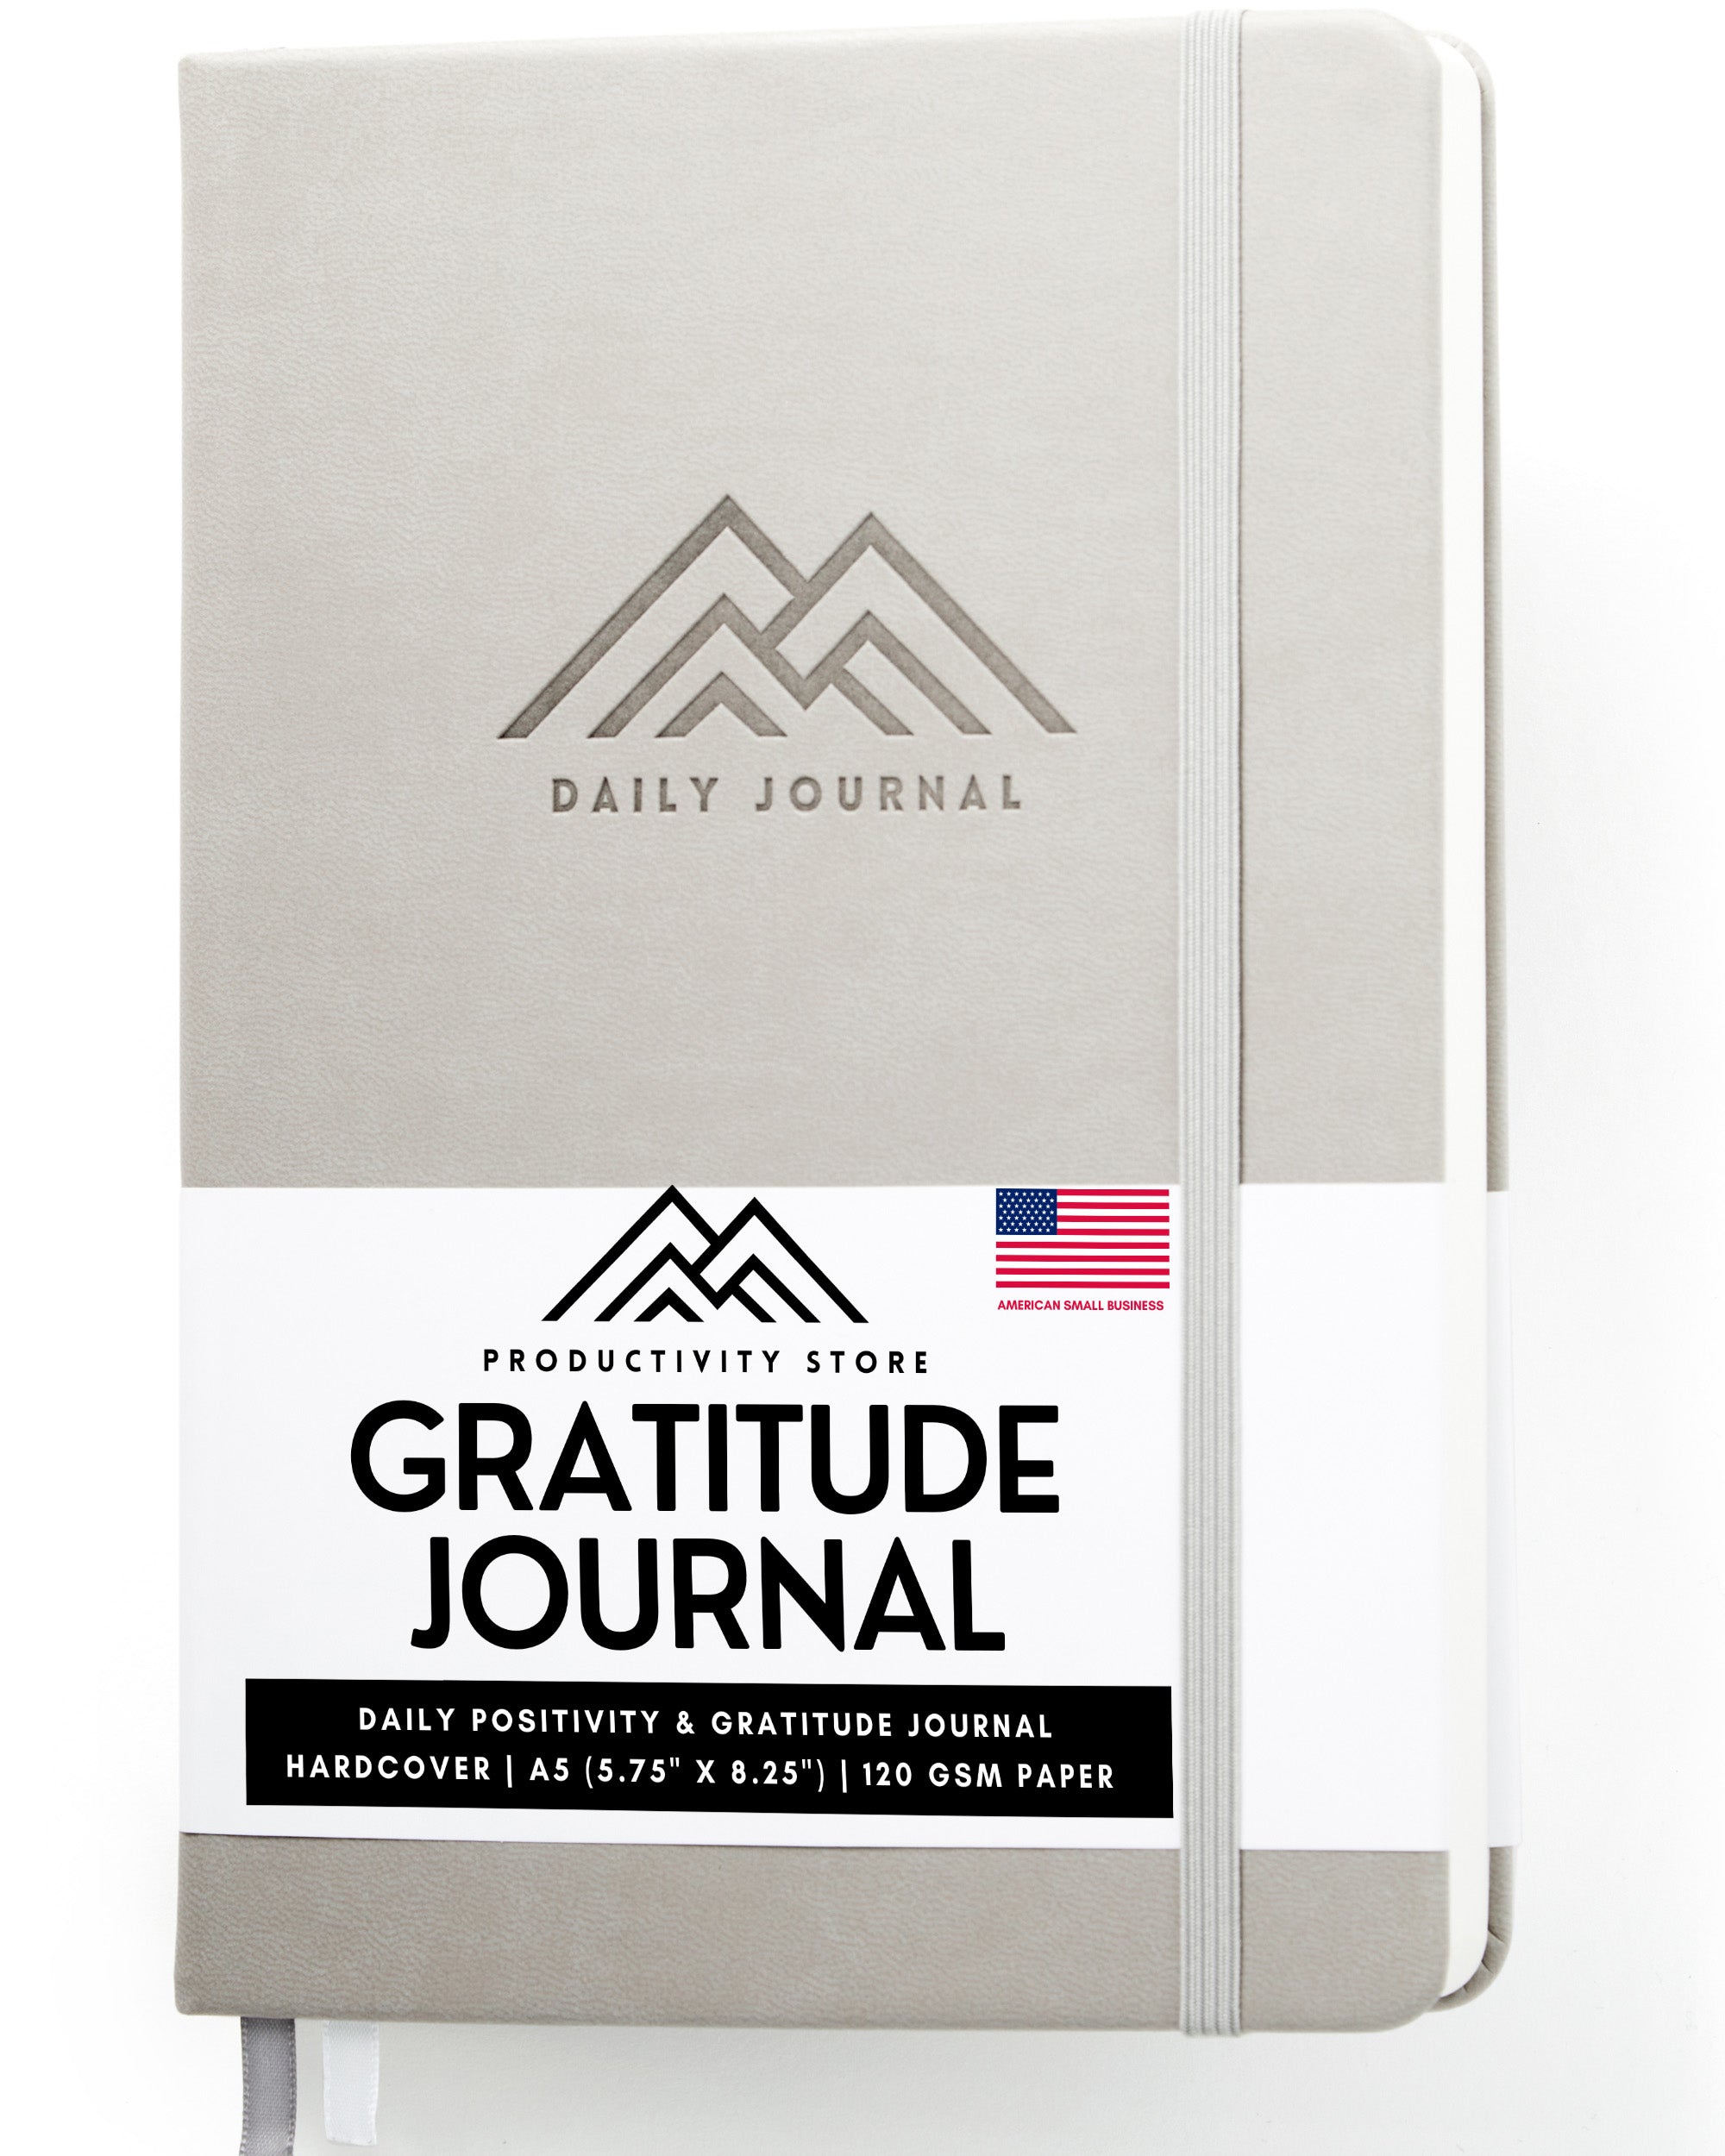 Abundance is Yours: How Gratitude Journaling Can Change Your Life